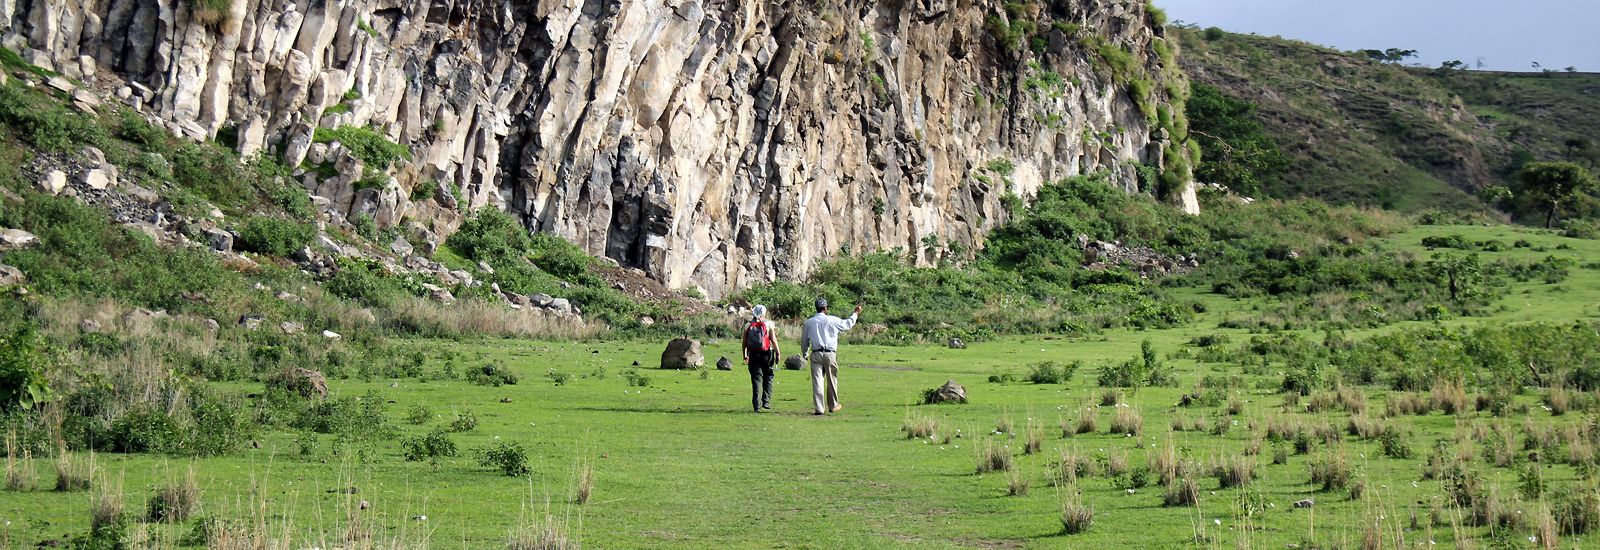 Two people walking outside in grassland with a cliff to the left